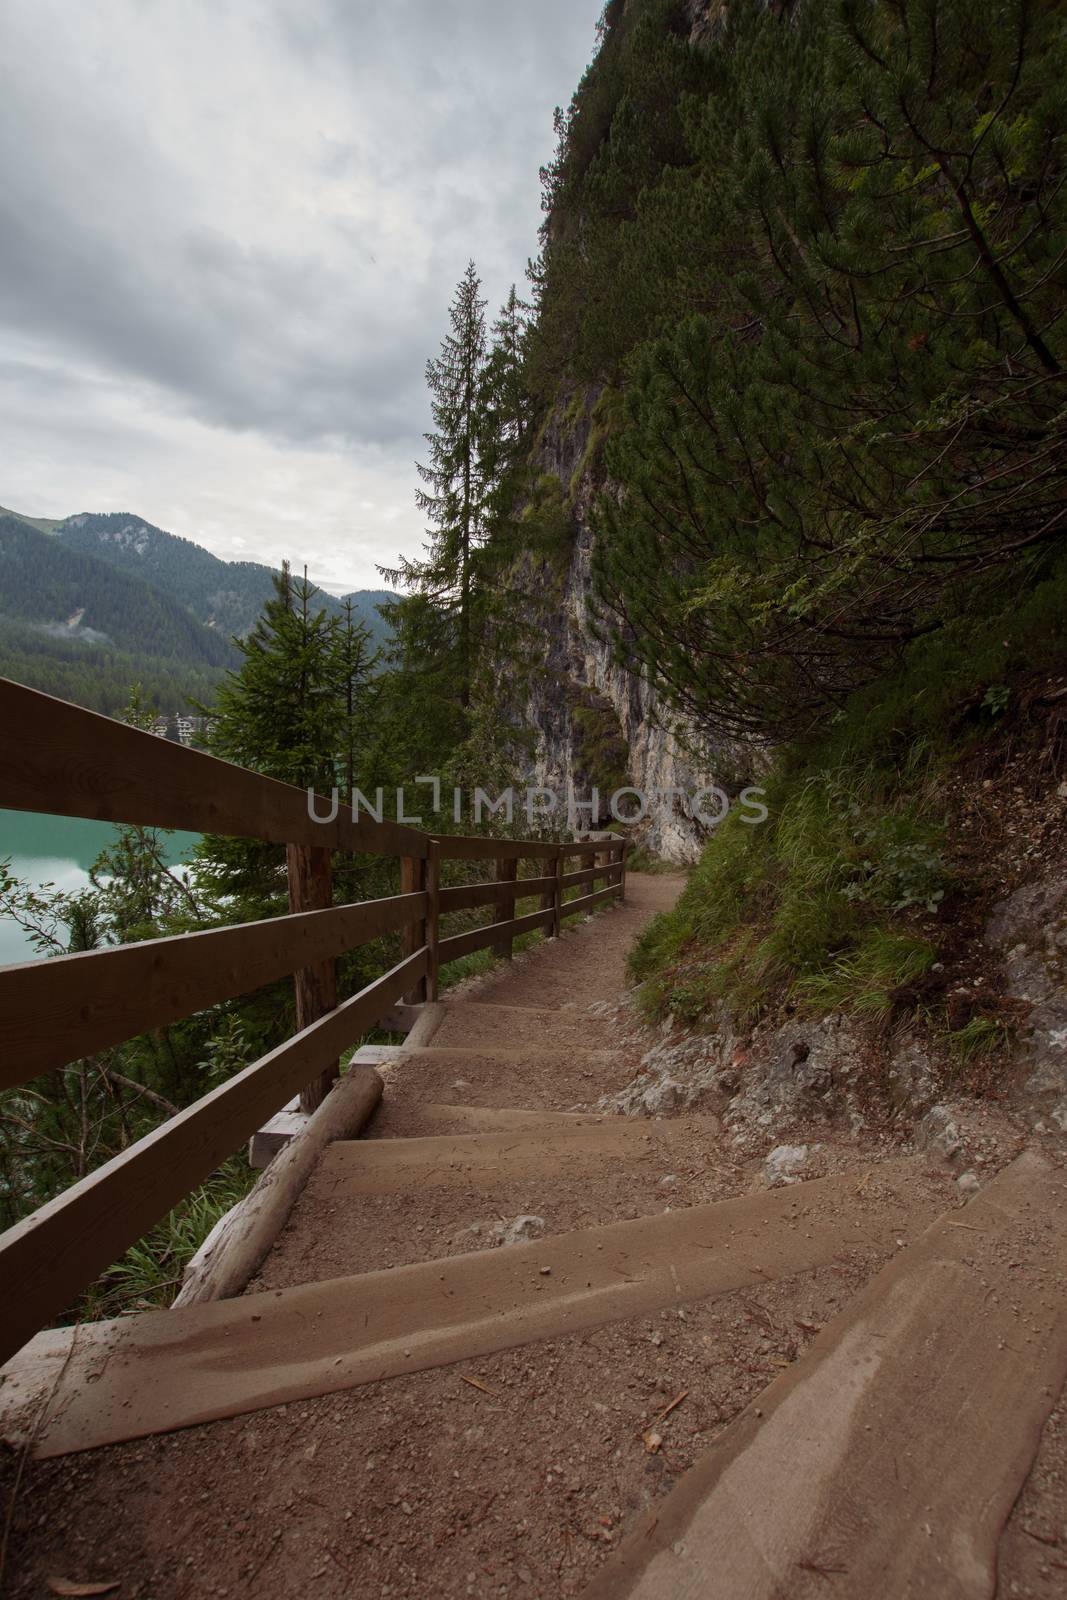 Dirt path to staircase runs along the Braies Lake under a cloudy by brambillasimone